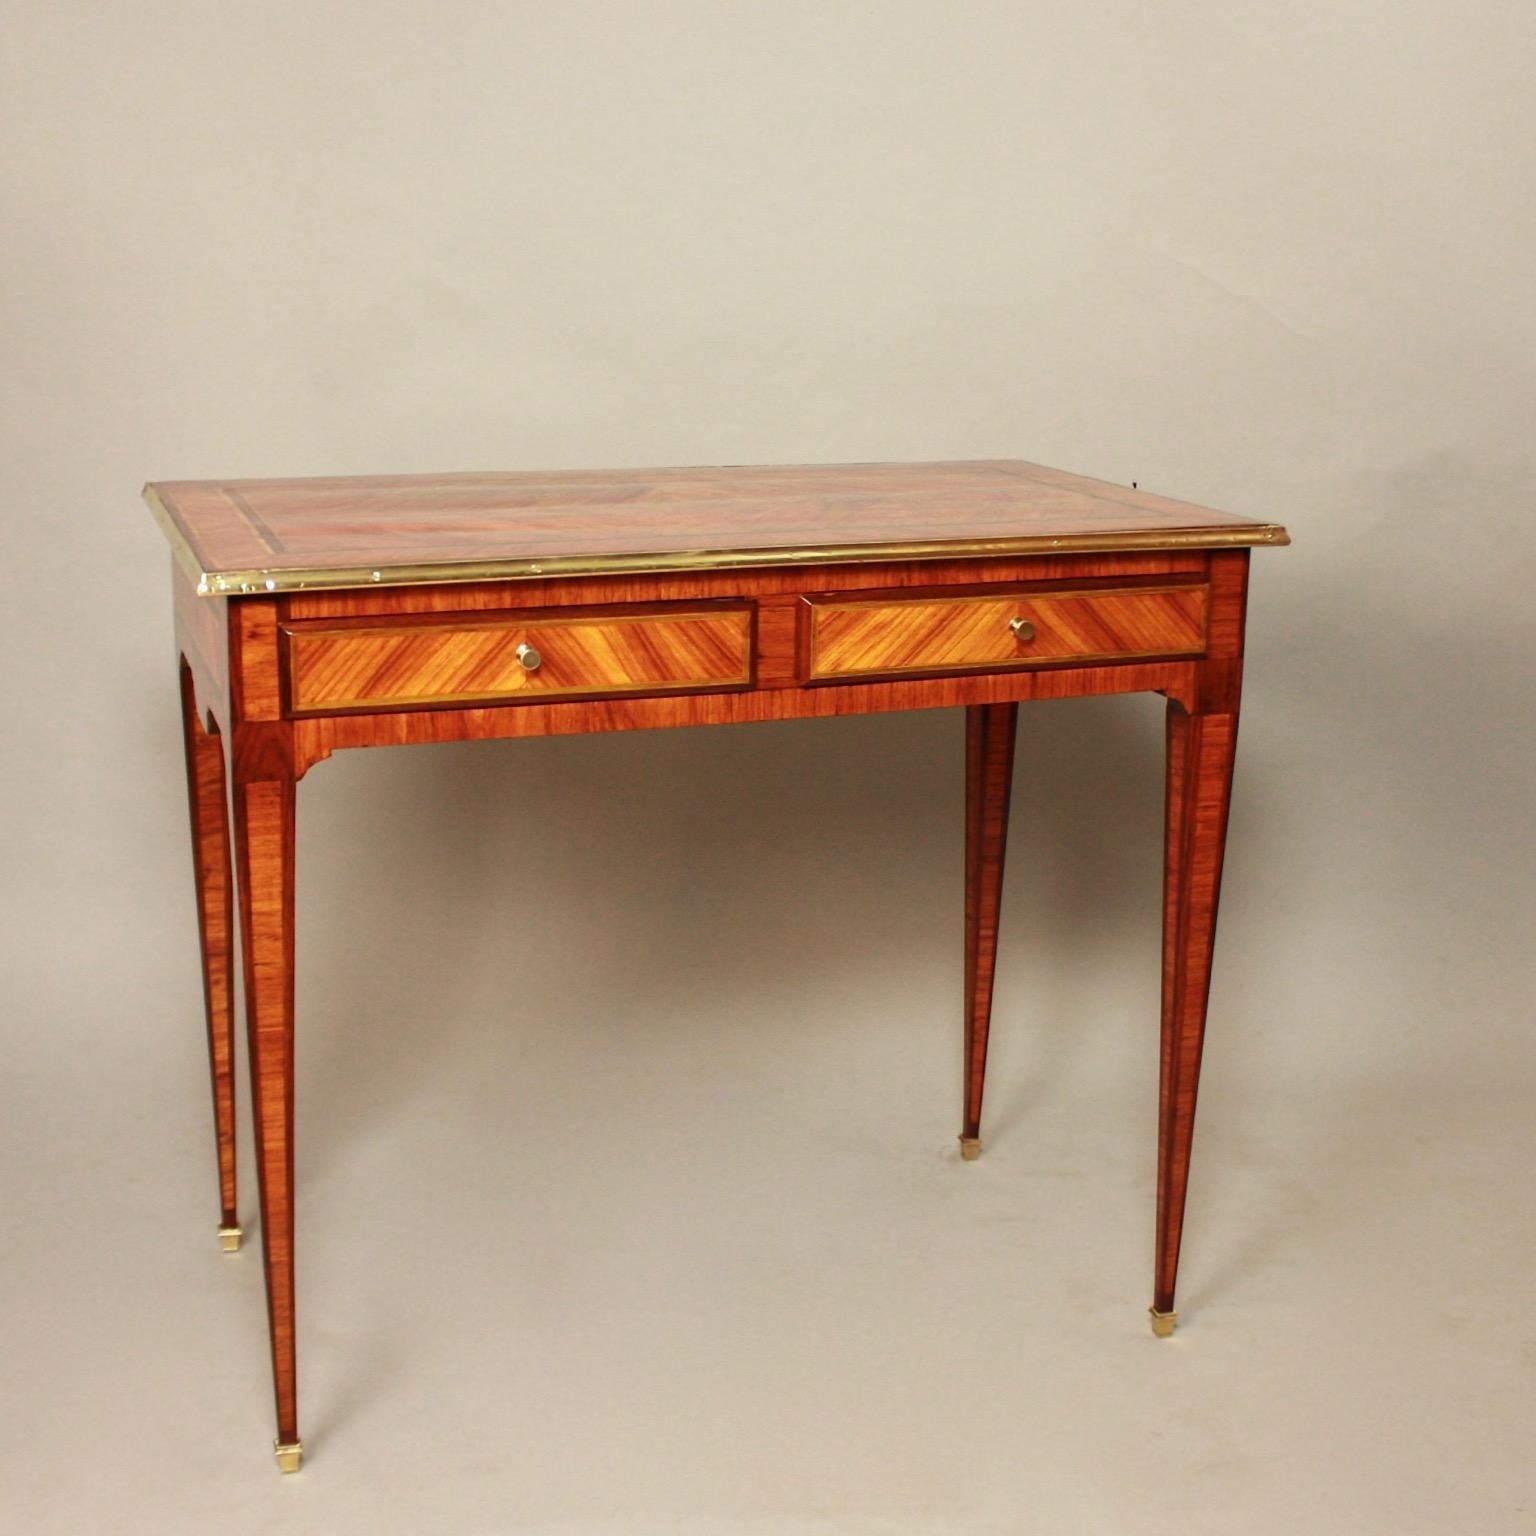 A small bureau plat or writing desk, the rectangular gilt-bronze banded top quarter veneered in kingwood. The panelled frieze compartment with two frieze drawers, each with a dummy drawer at the back. With leather lined candle slides, on panelled